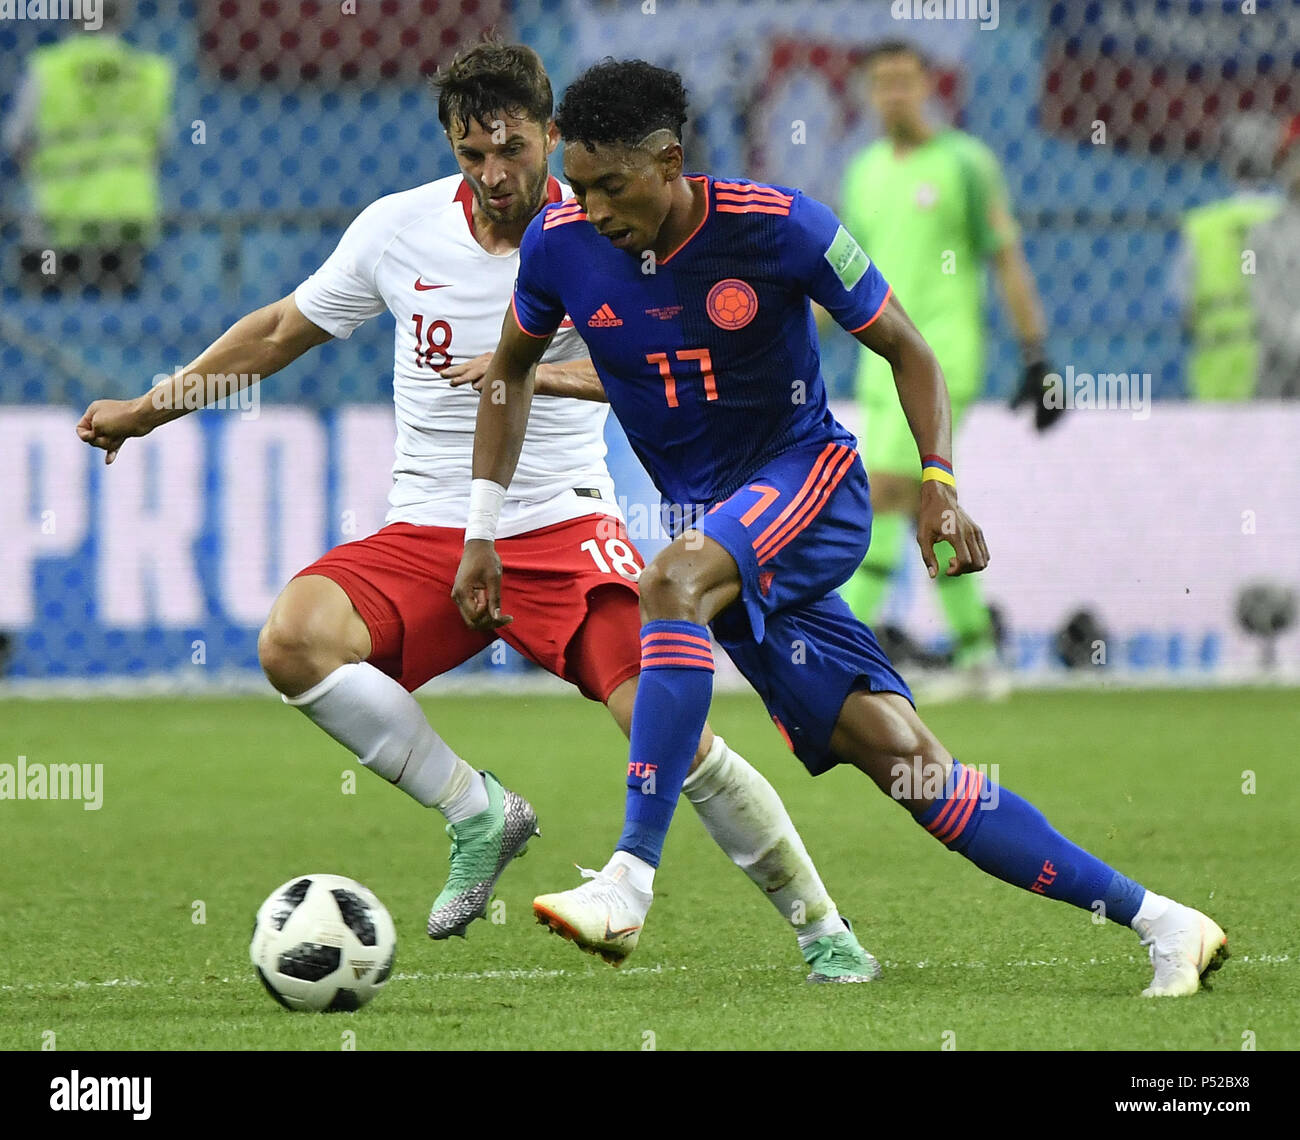 Kazan, Russia. 24th June, 2018. Bartosz Bereszynski (L) of Poland vies with Johan Mojica of Colombia during the 2018 FIFA World Cup Group H match between Poland and Colombia in Kazan, Russia, June 24, 2018. Credit: He Canling/Xinhua/Alamy Live News Stock Photo